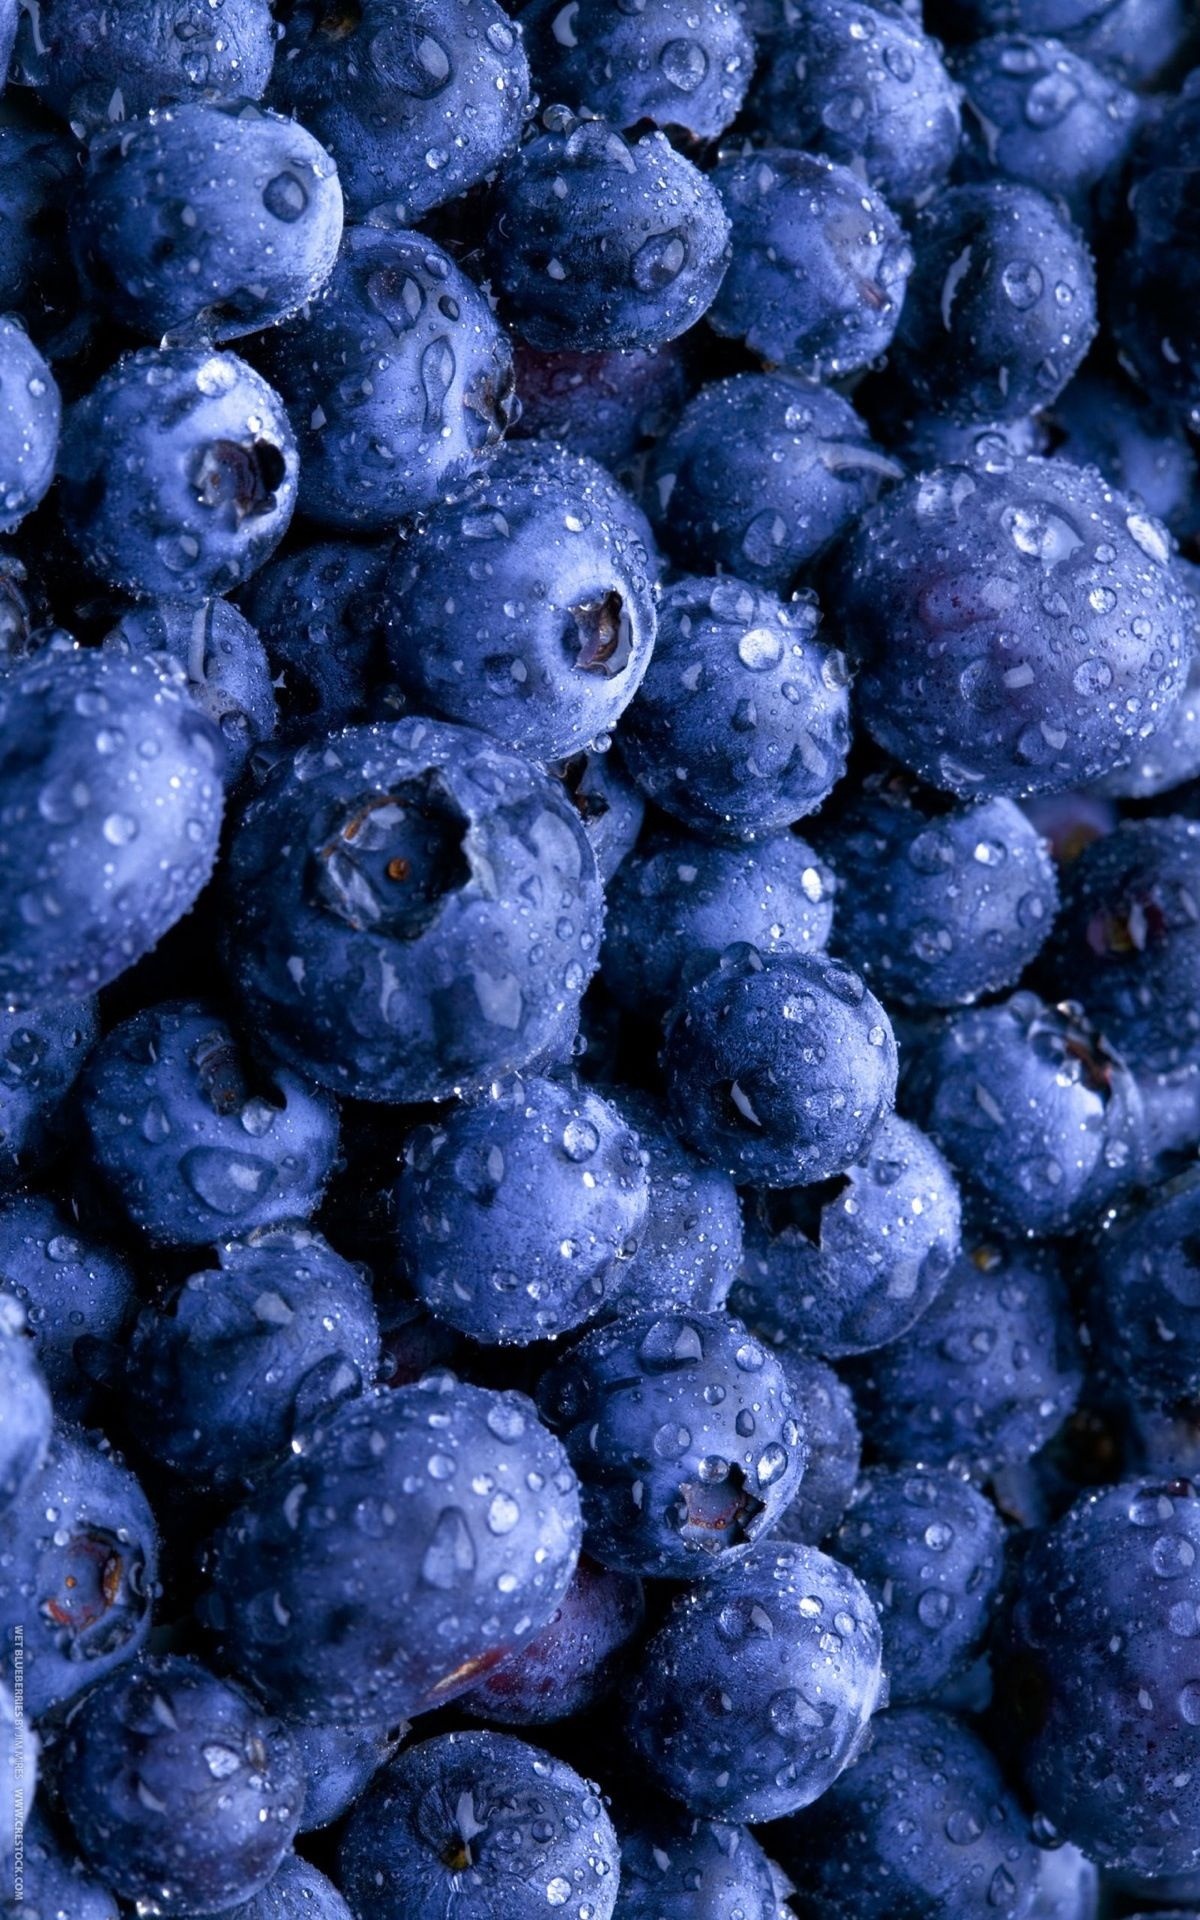 Huckleberry: An excellent source of dietary fiber, vitamin C, vitamin K, manganese, iron. 1200x1920 HD Background.